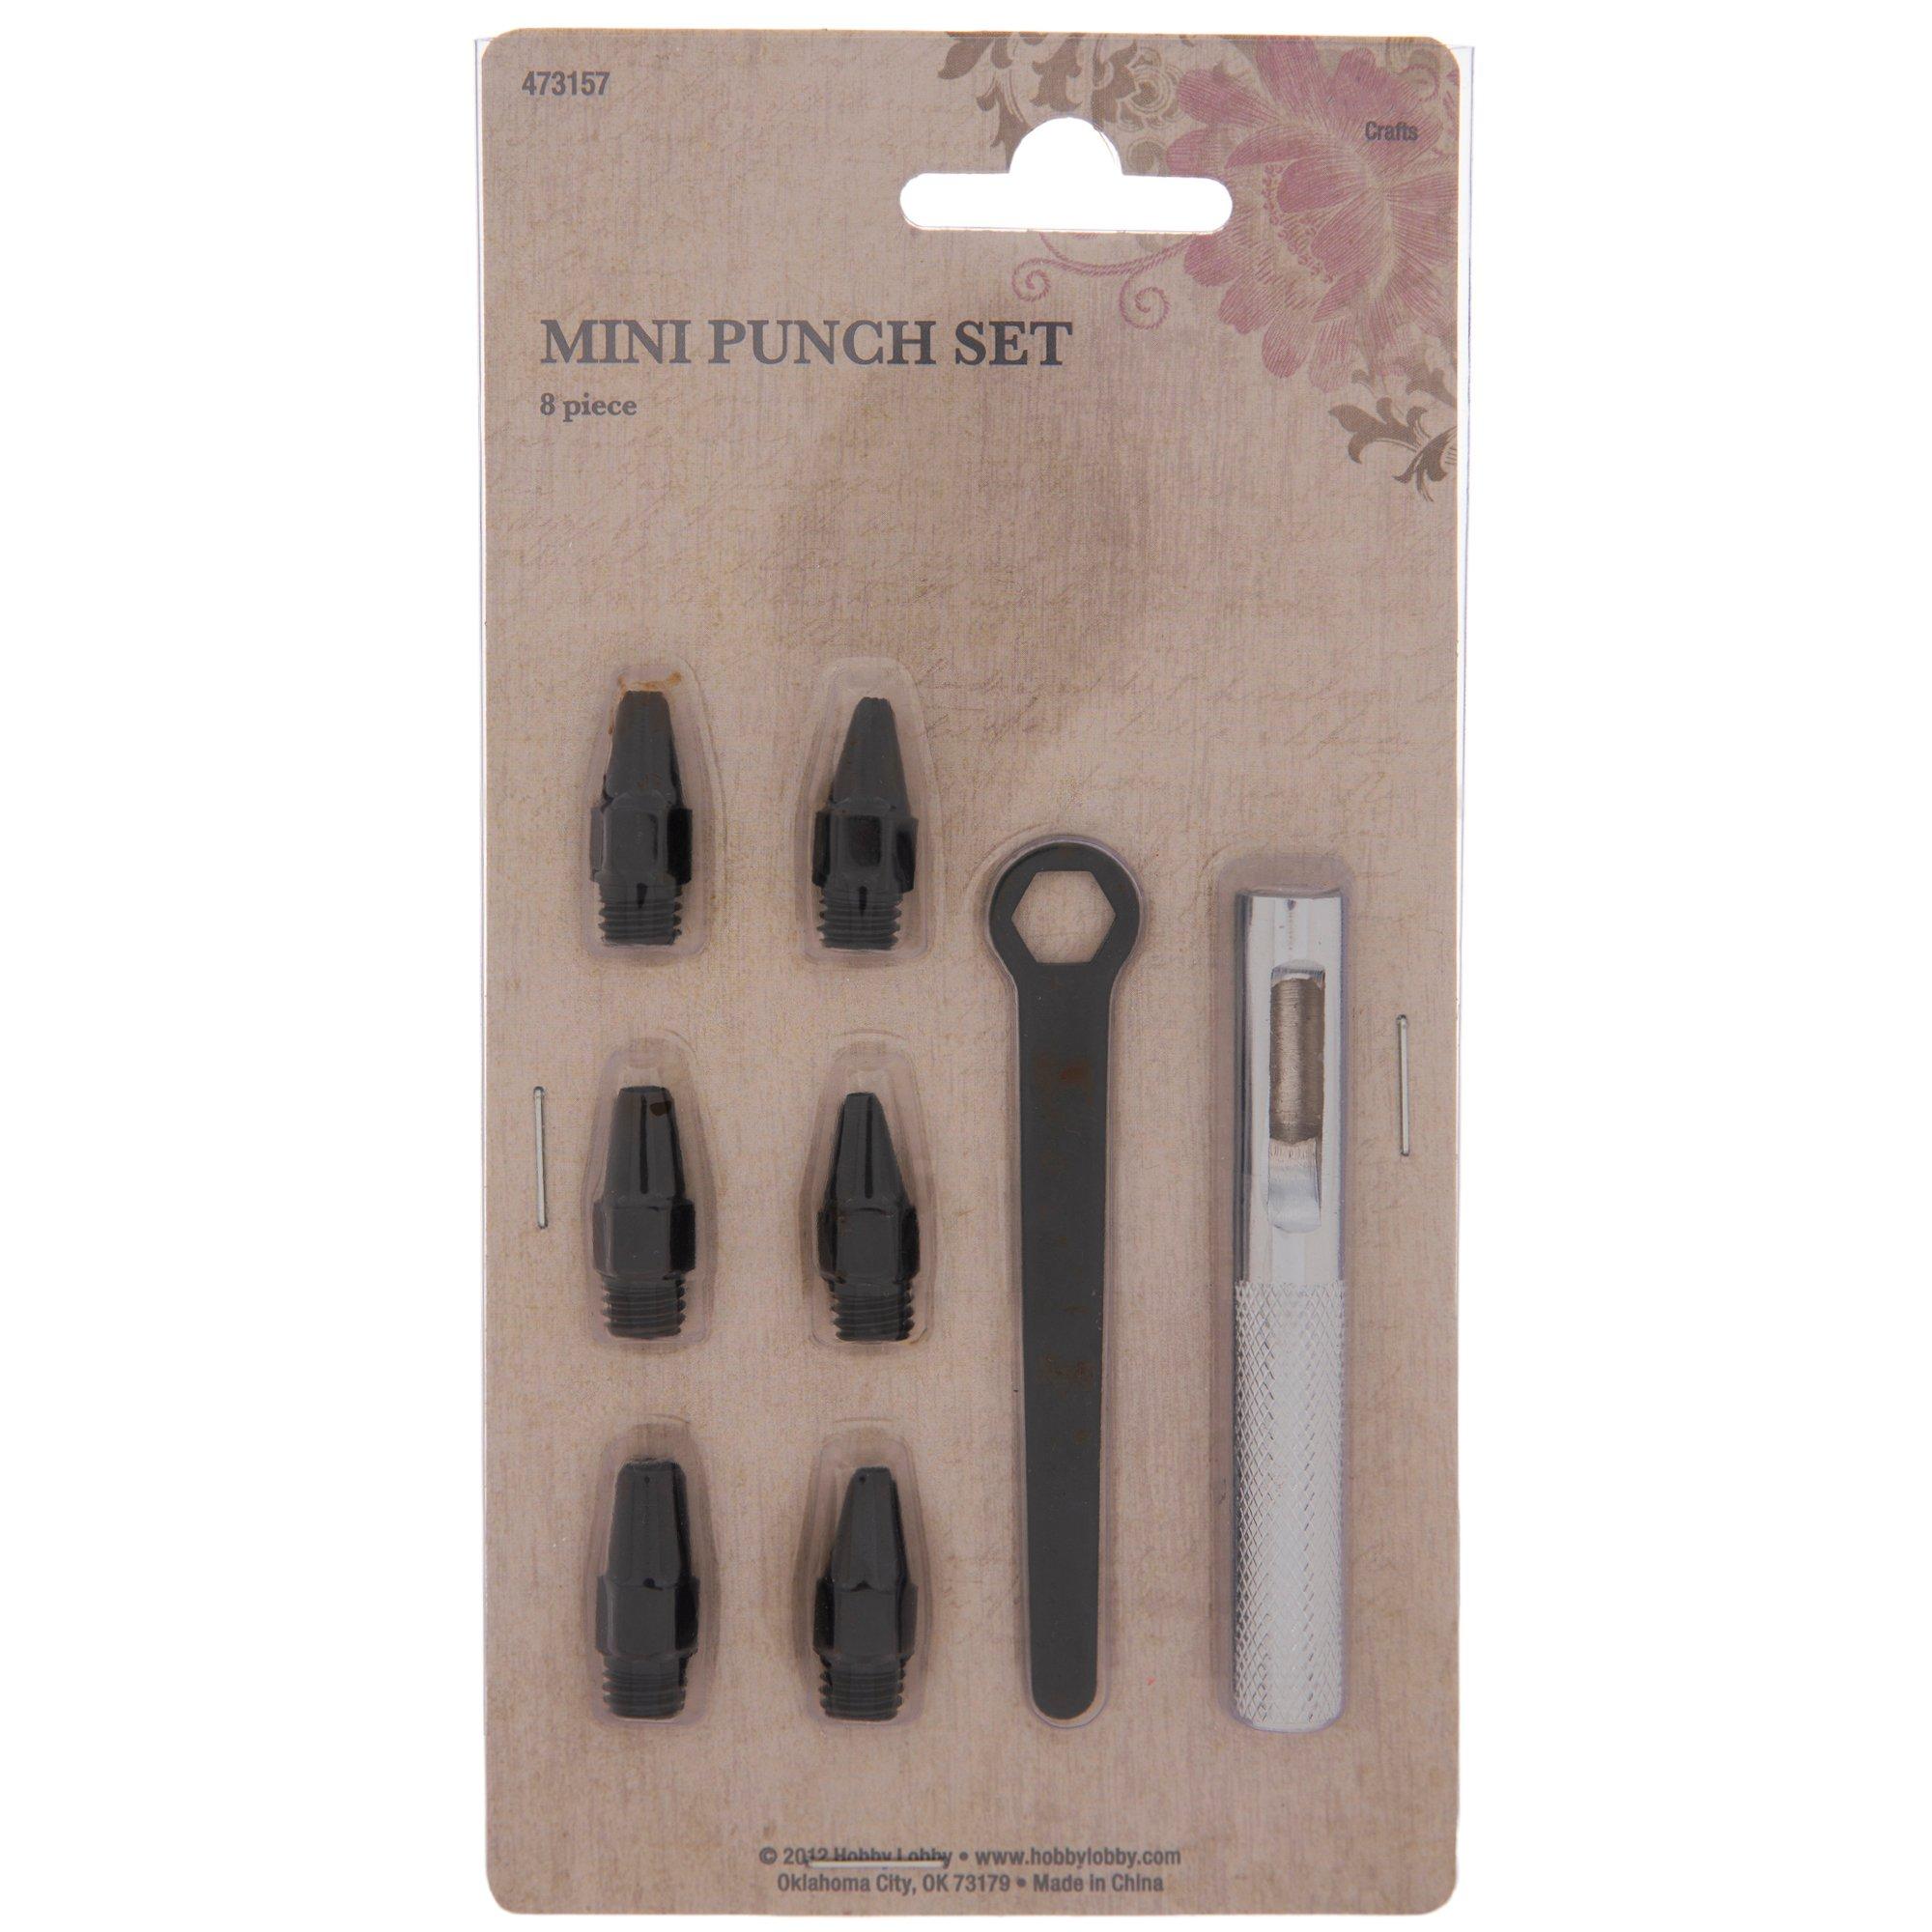 Leather Punch Set With 7 Punch Sizes, Brettuns Village